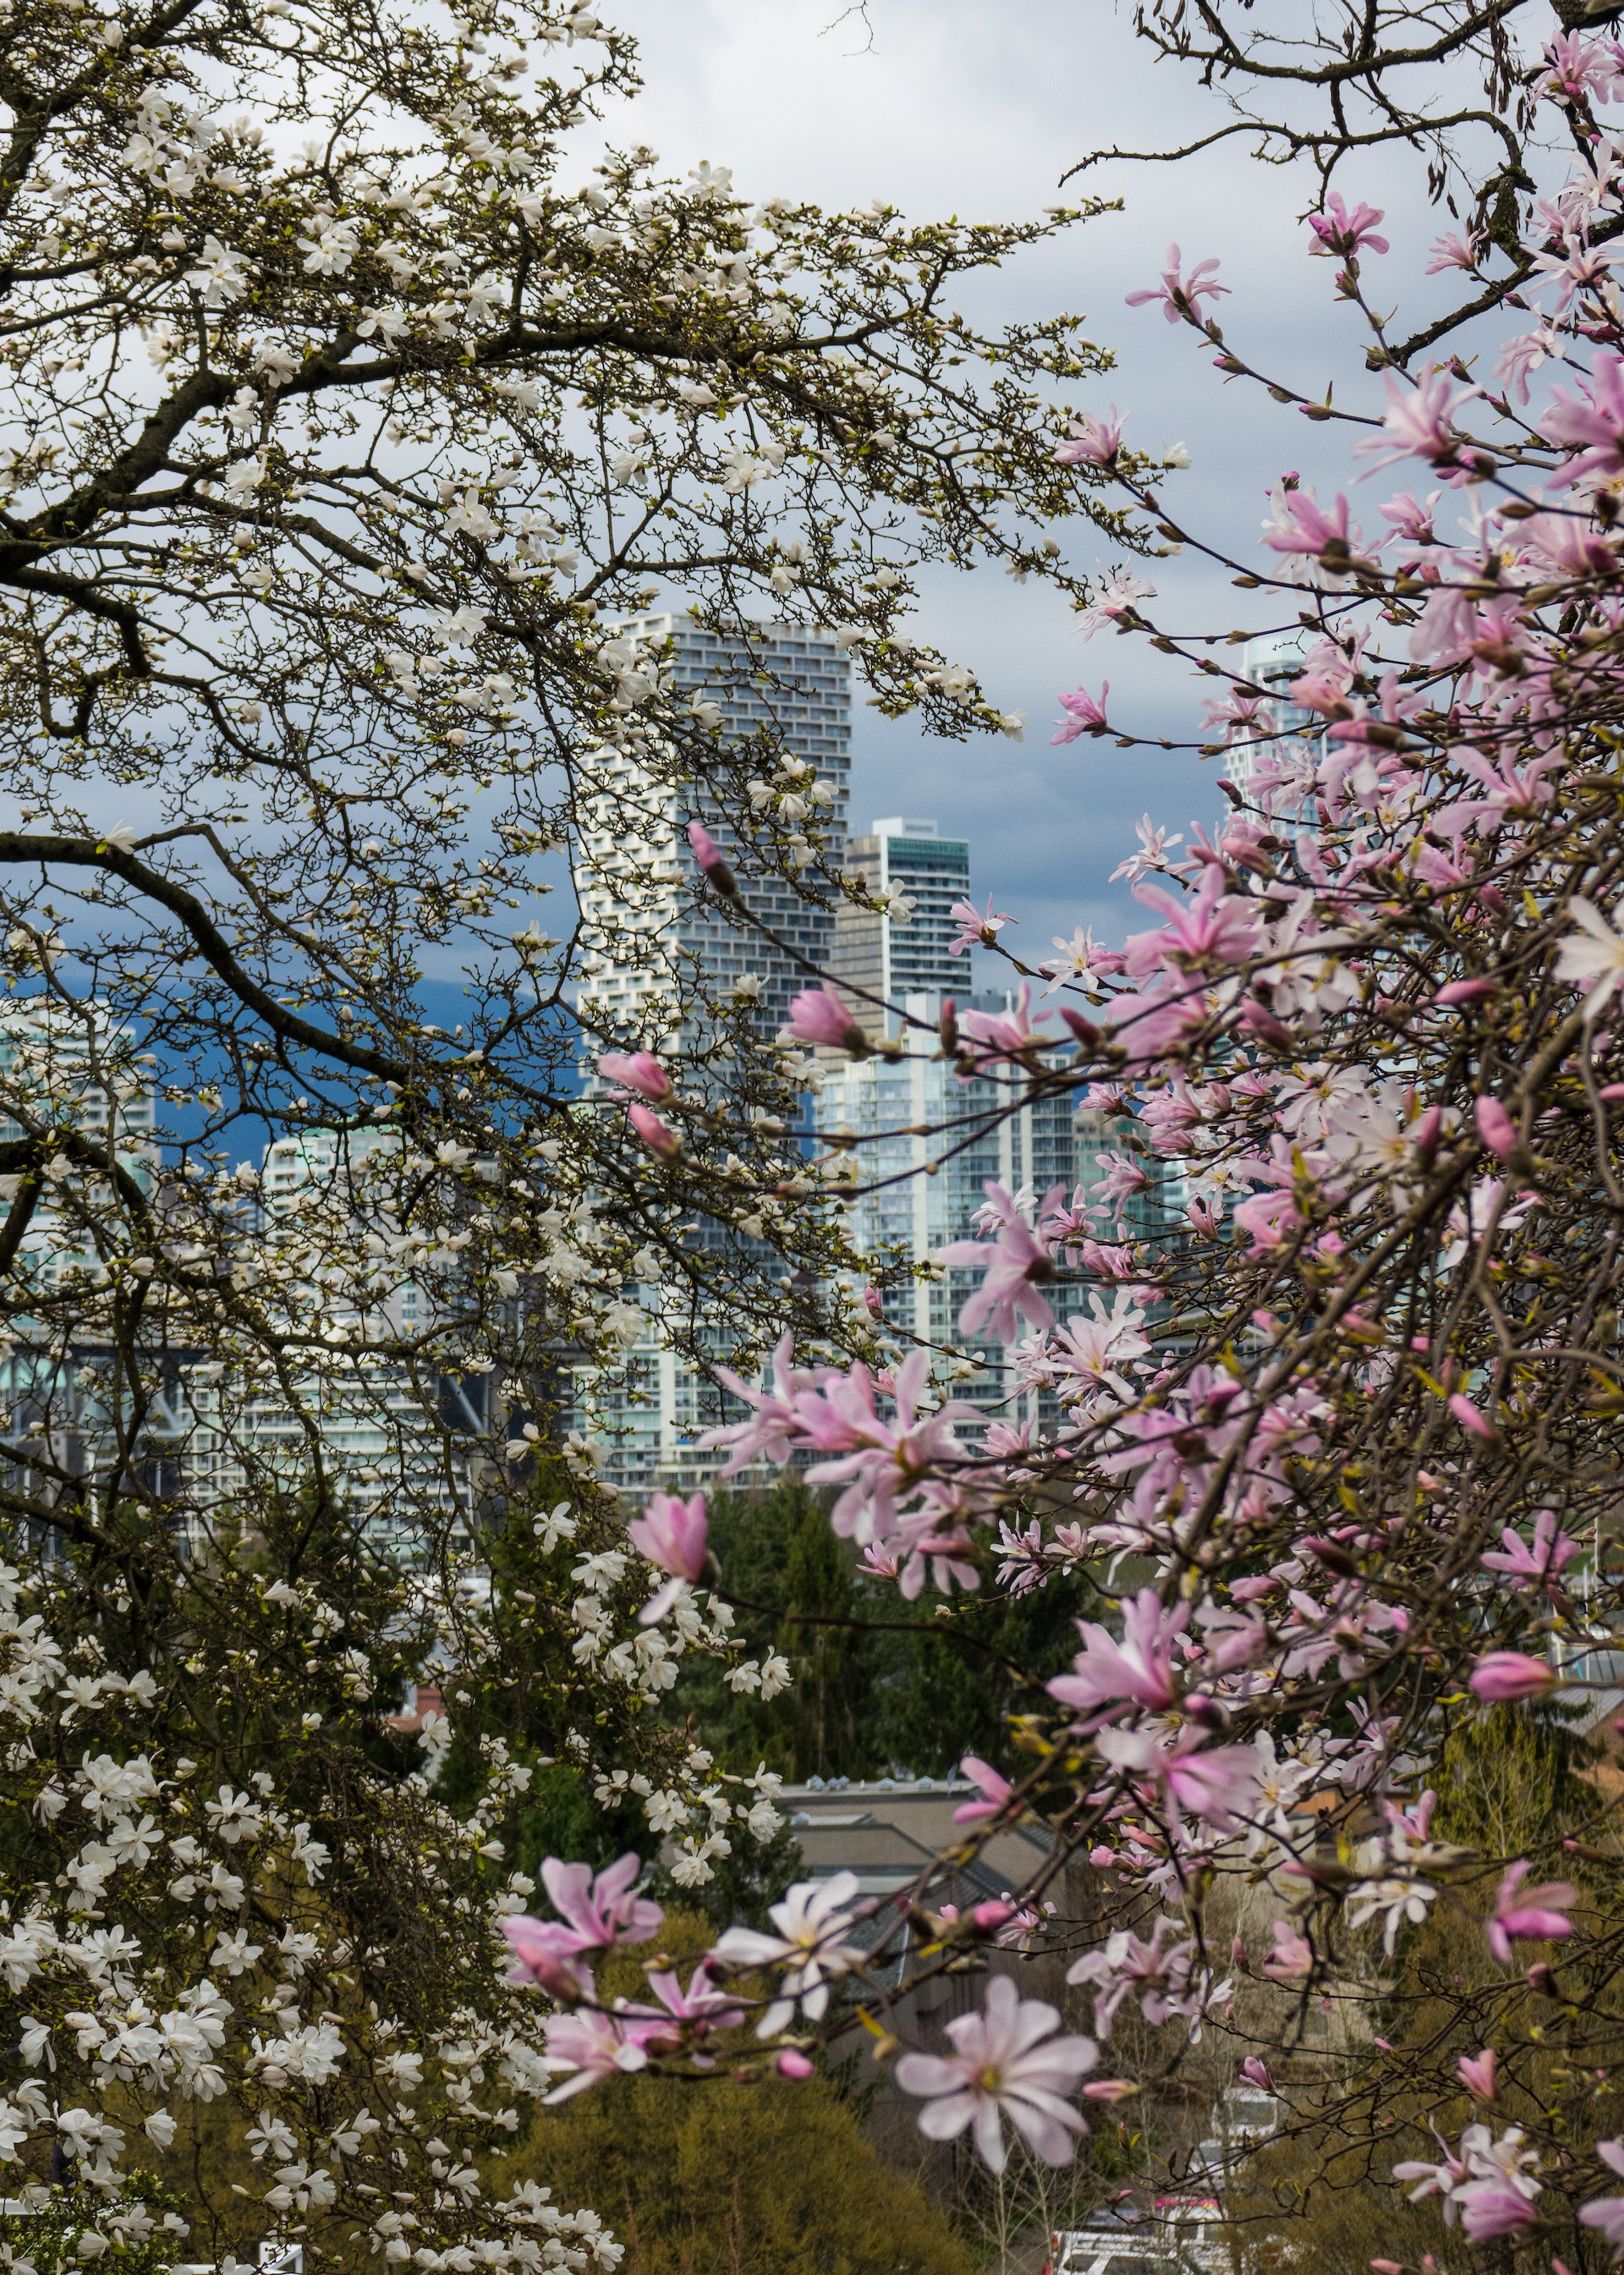  Vancouver House through the blossoms. 